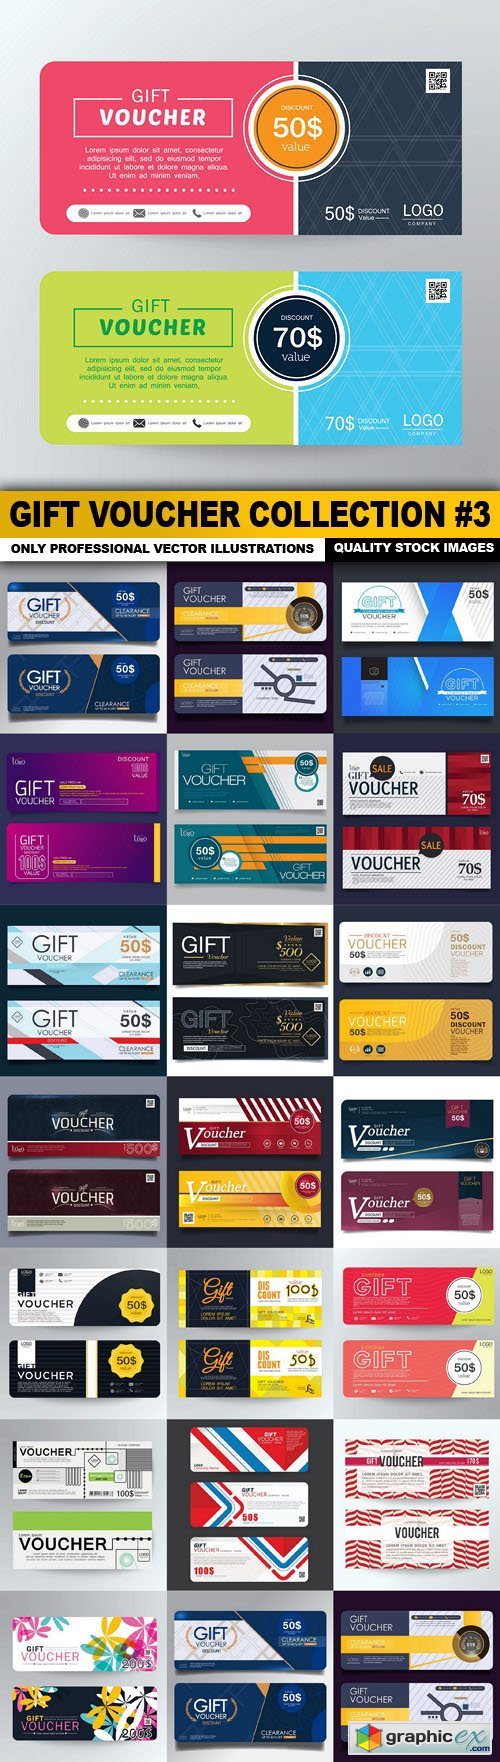 Gift Voucher Collection #3